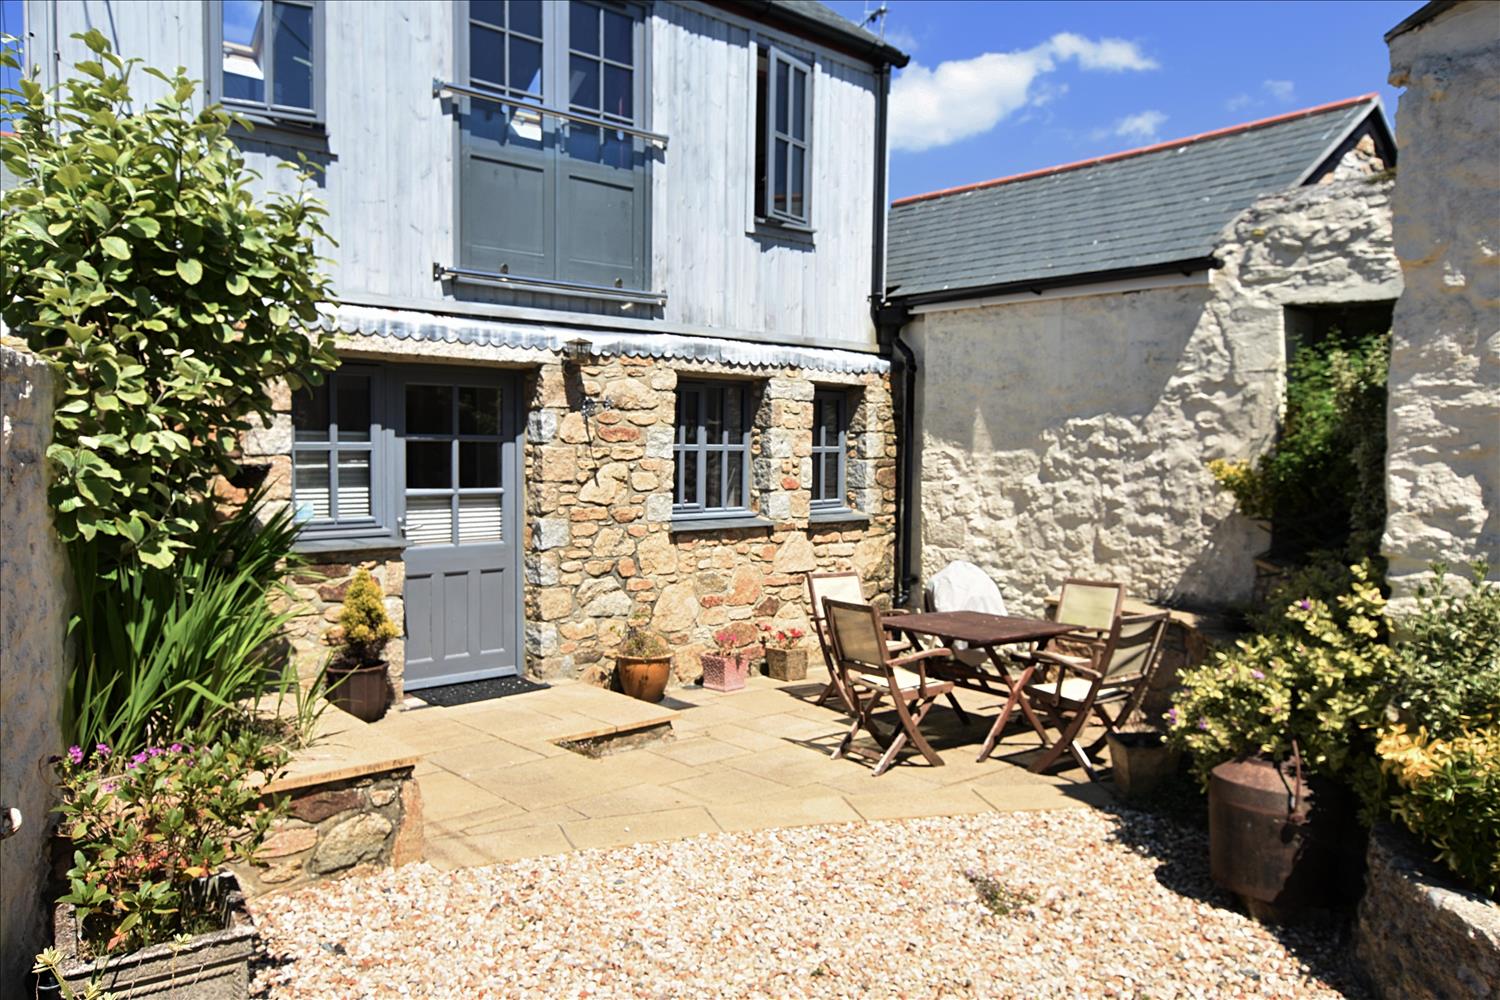 THE S'NOOK, ST JUST Cottage for rent in Penzance, Cornwall